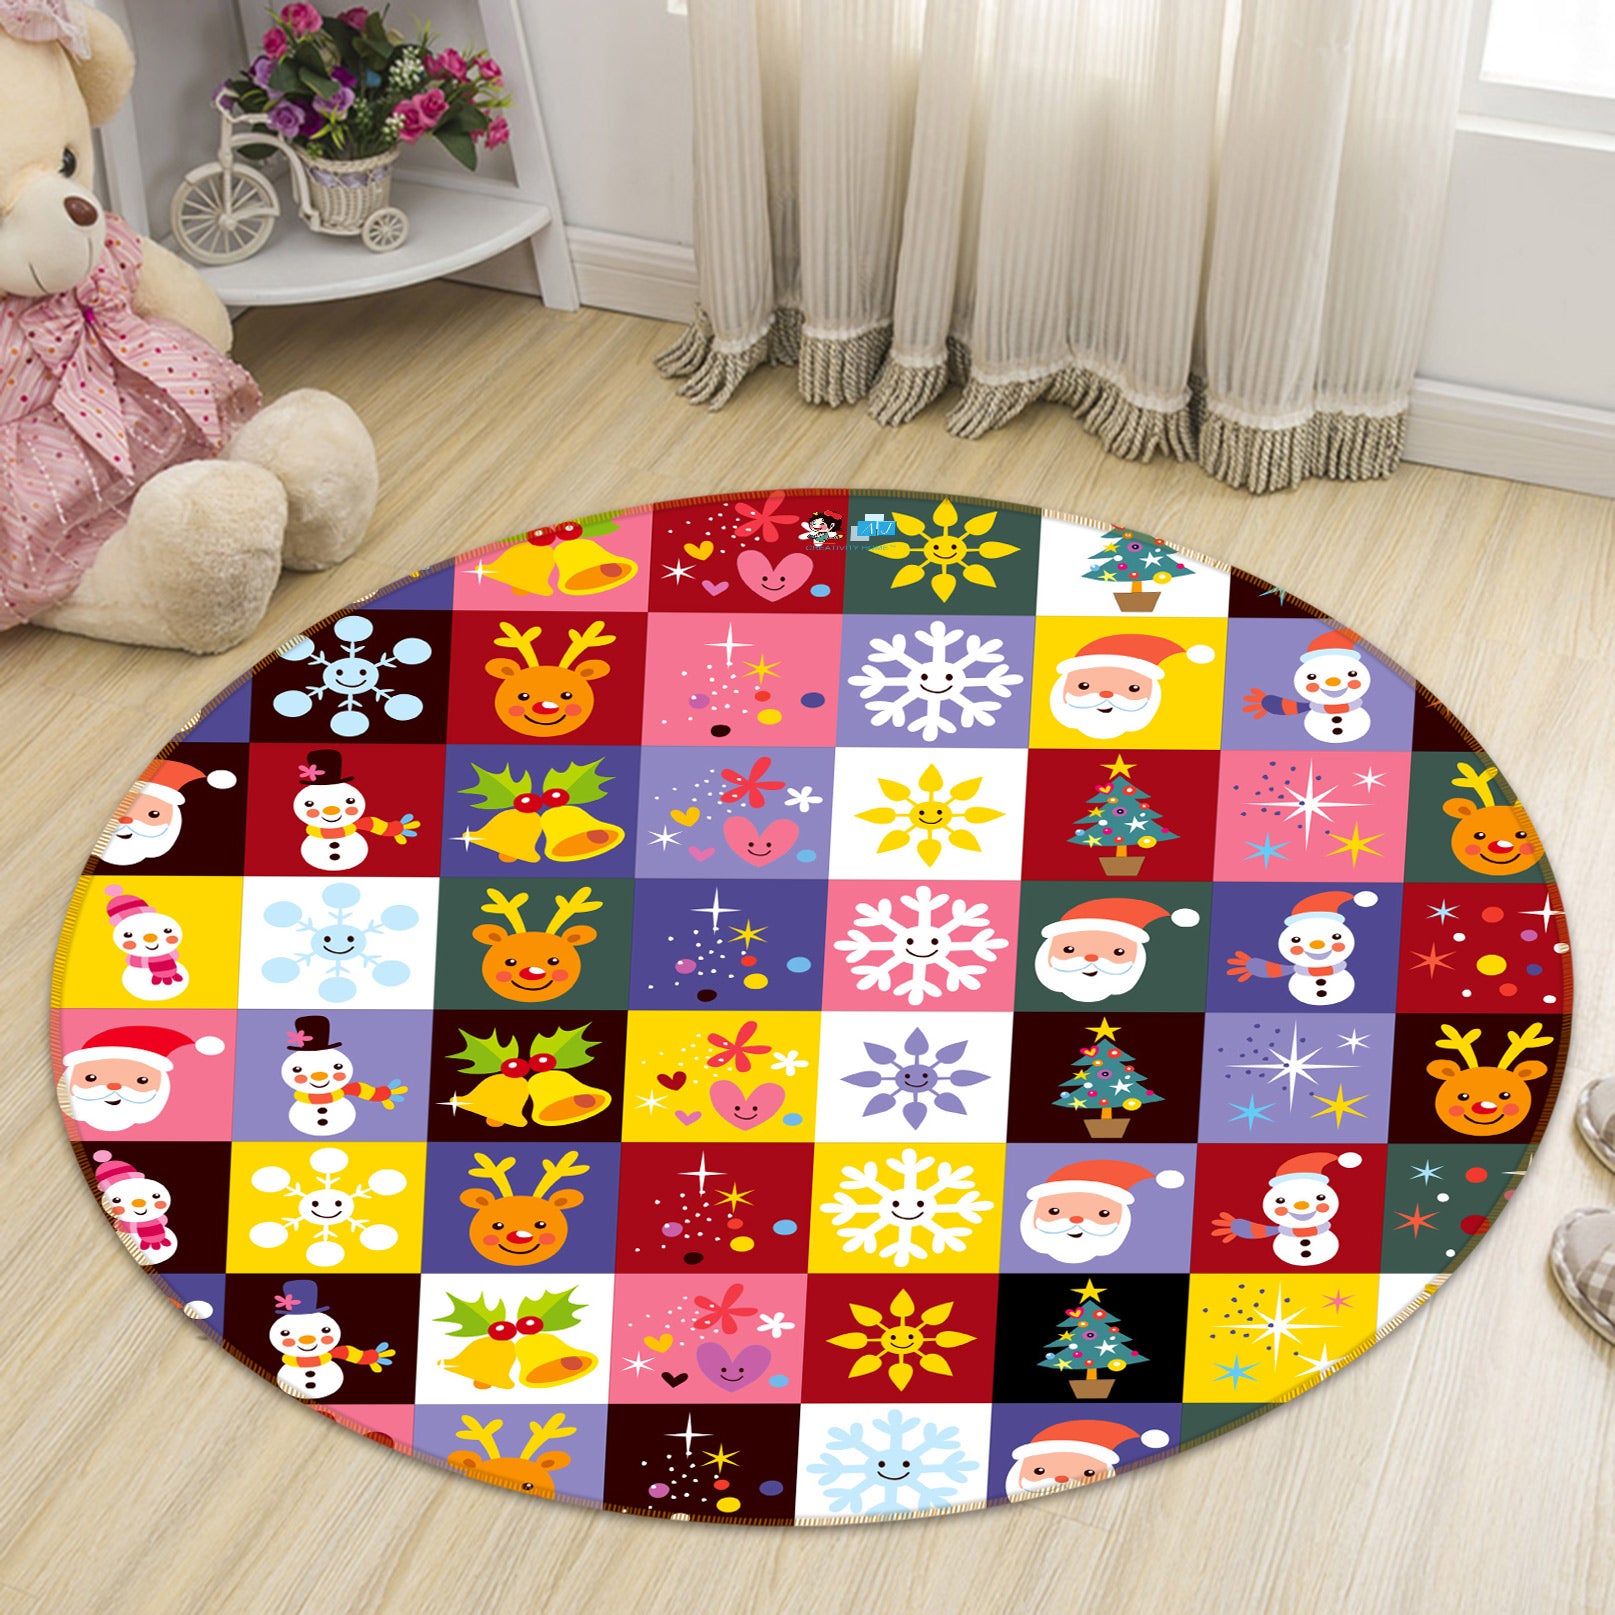 3D Colored Square Snowflake Bell 54001 Christmas Round Non Slip Rug Mat Xmas